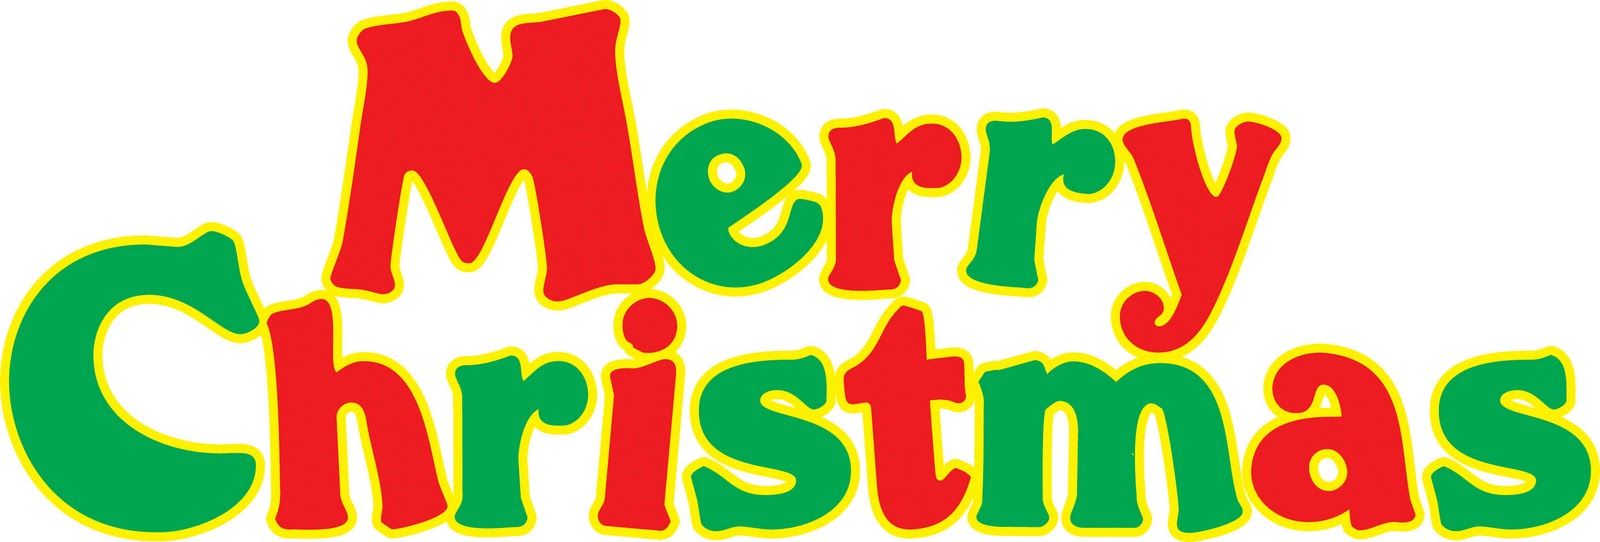 Free Merry Christmas Clipart